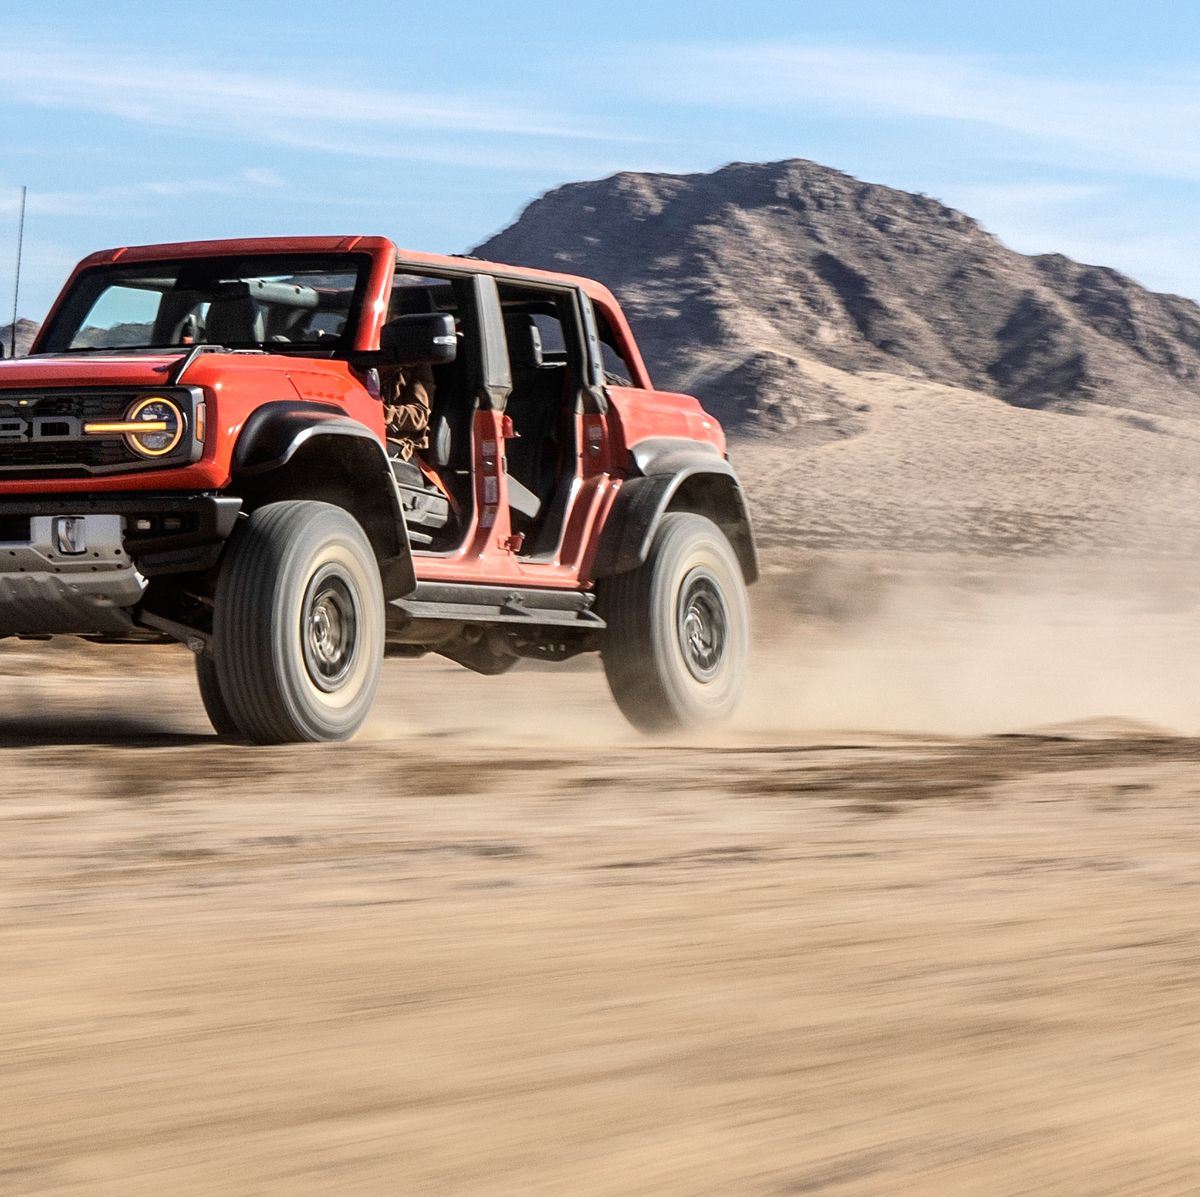 Going Offroad in Your Jeep? 5 Things You'll Want to Have in Place 